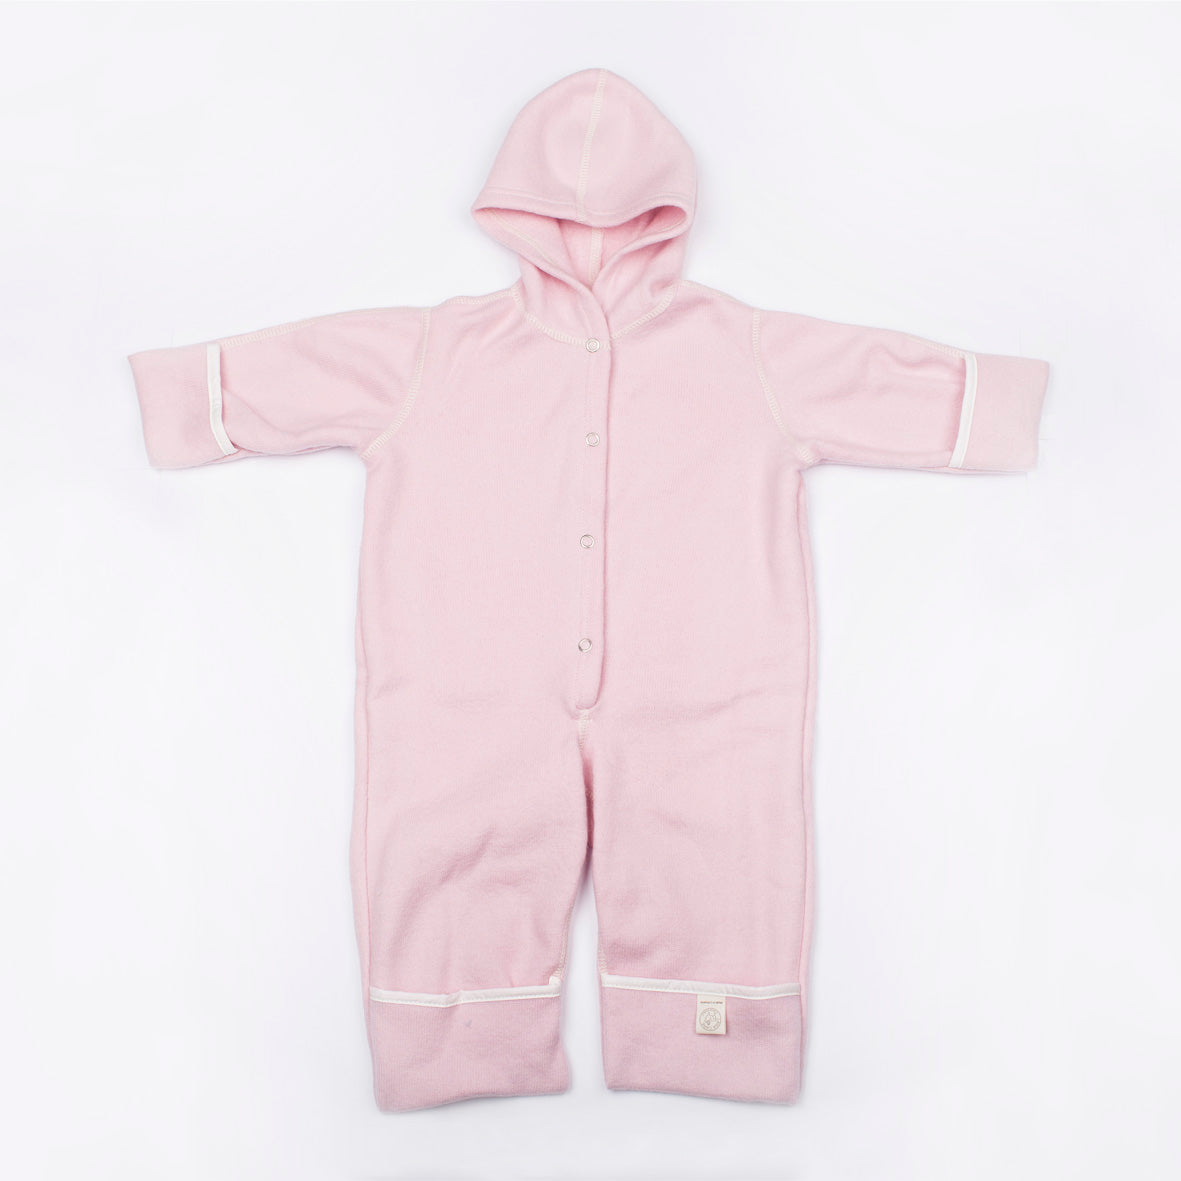 LANACare Organic Wool Overall with Hood, for Premature Baby